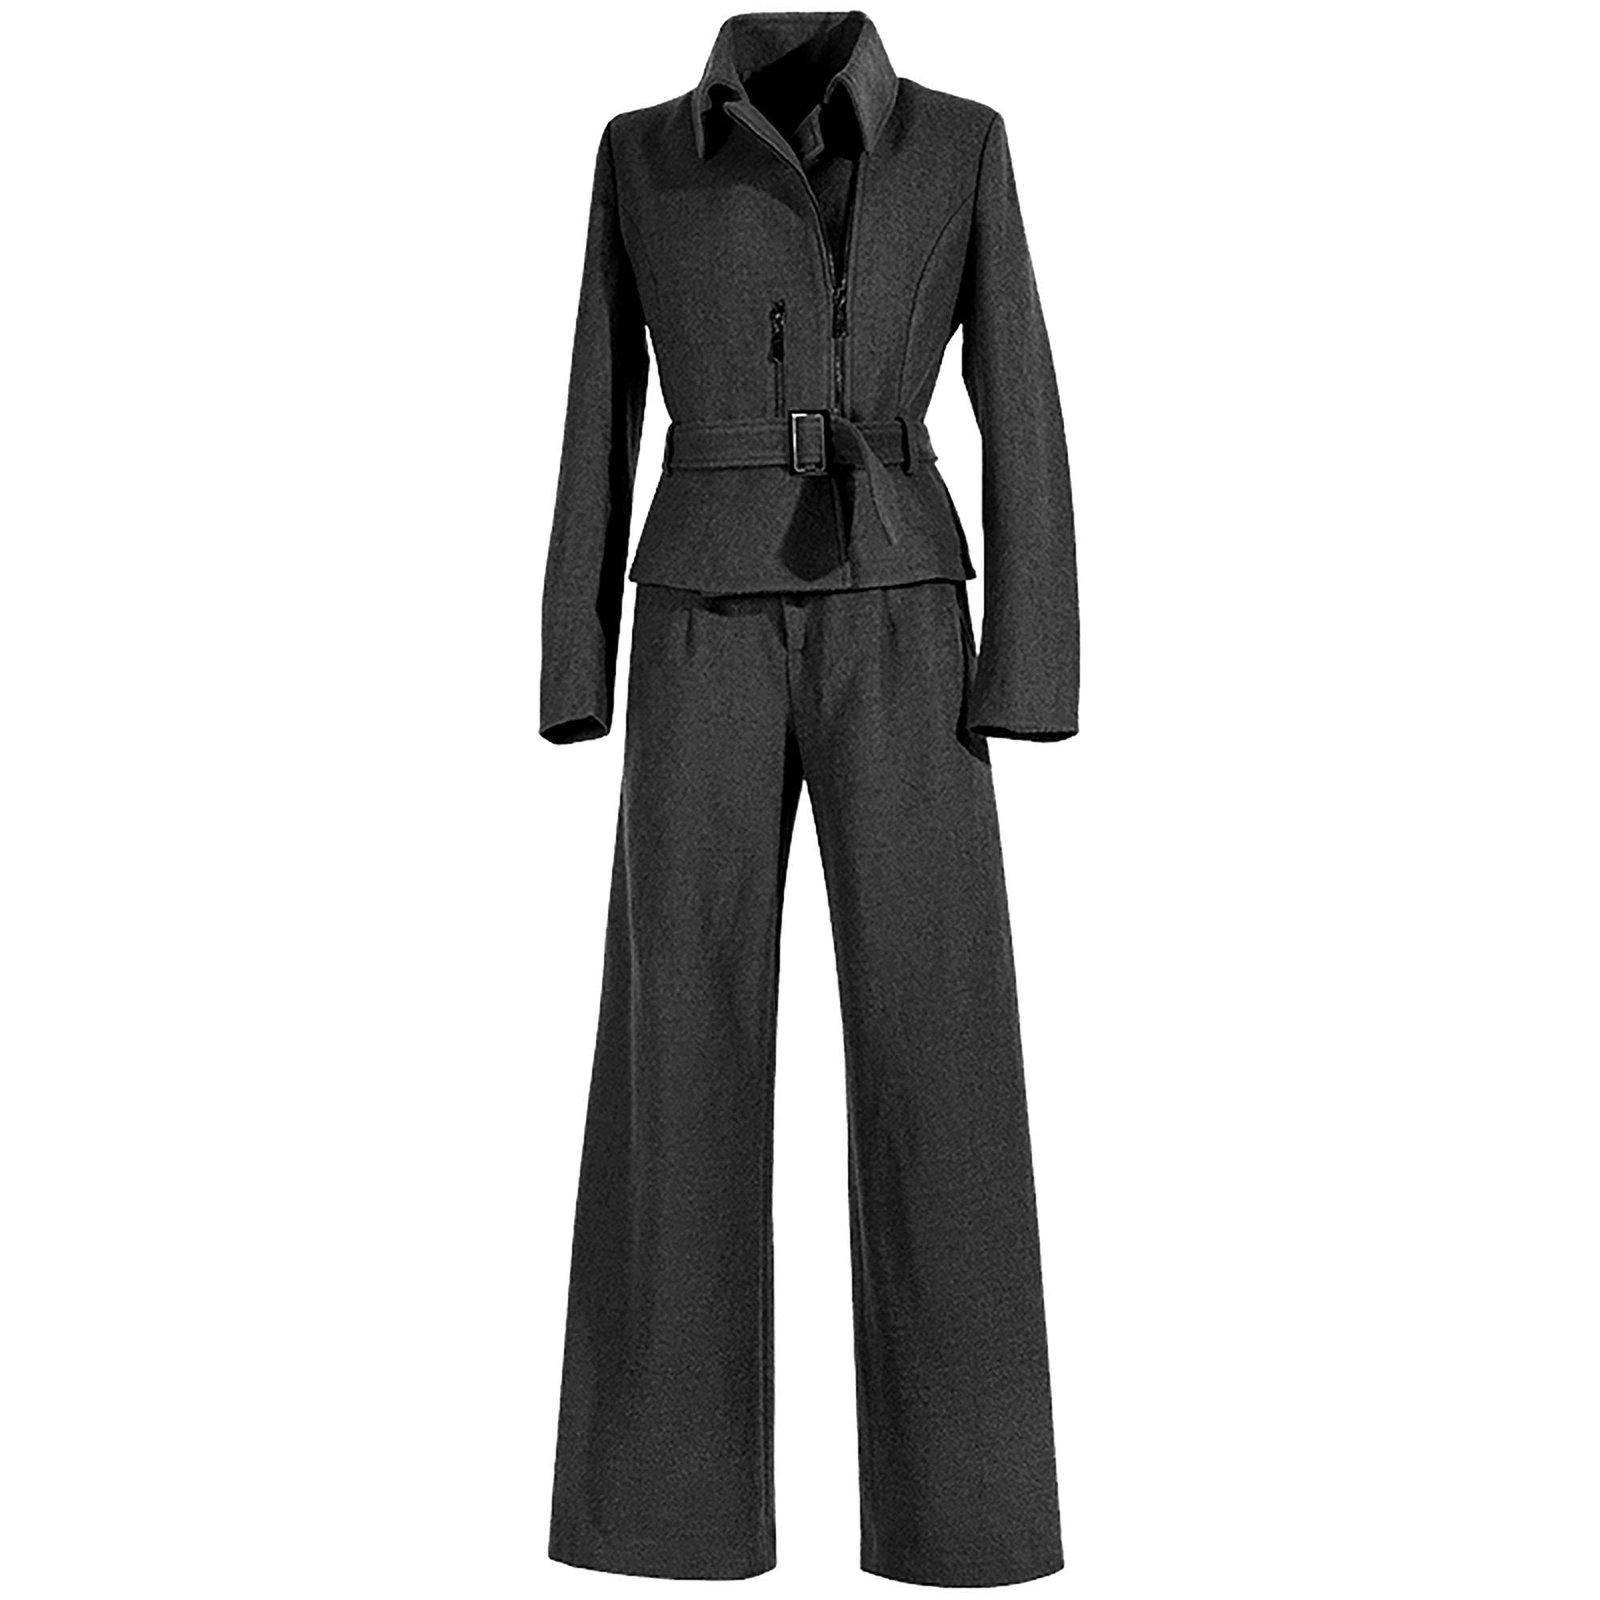 Black Special Occasions Pantsuit 2pc, Belted Suit Blazer With Wide